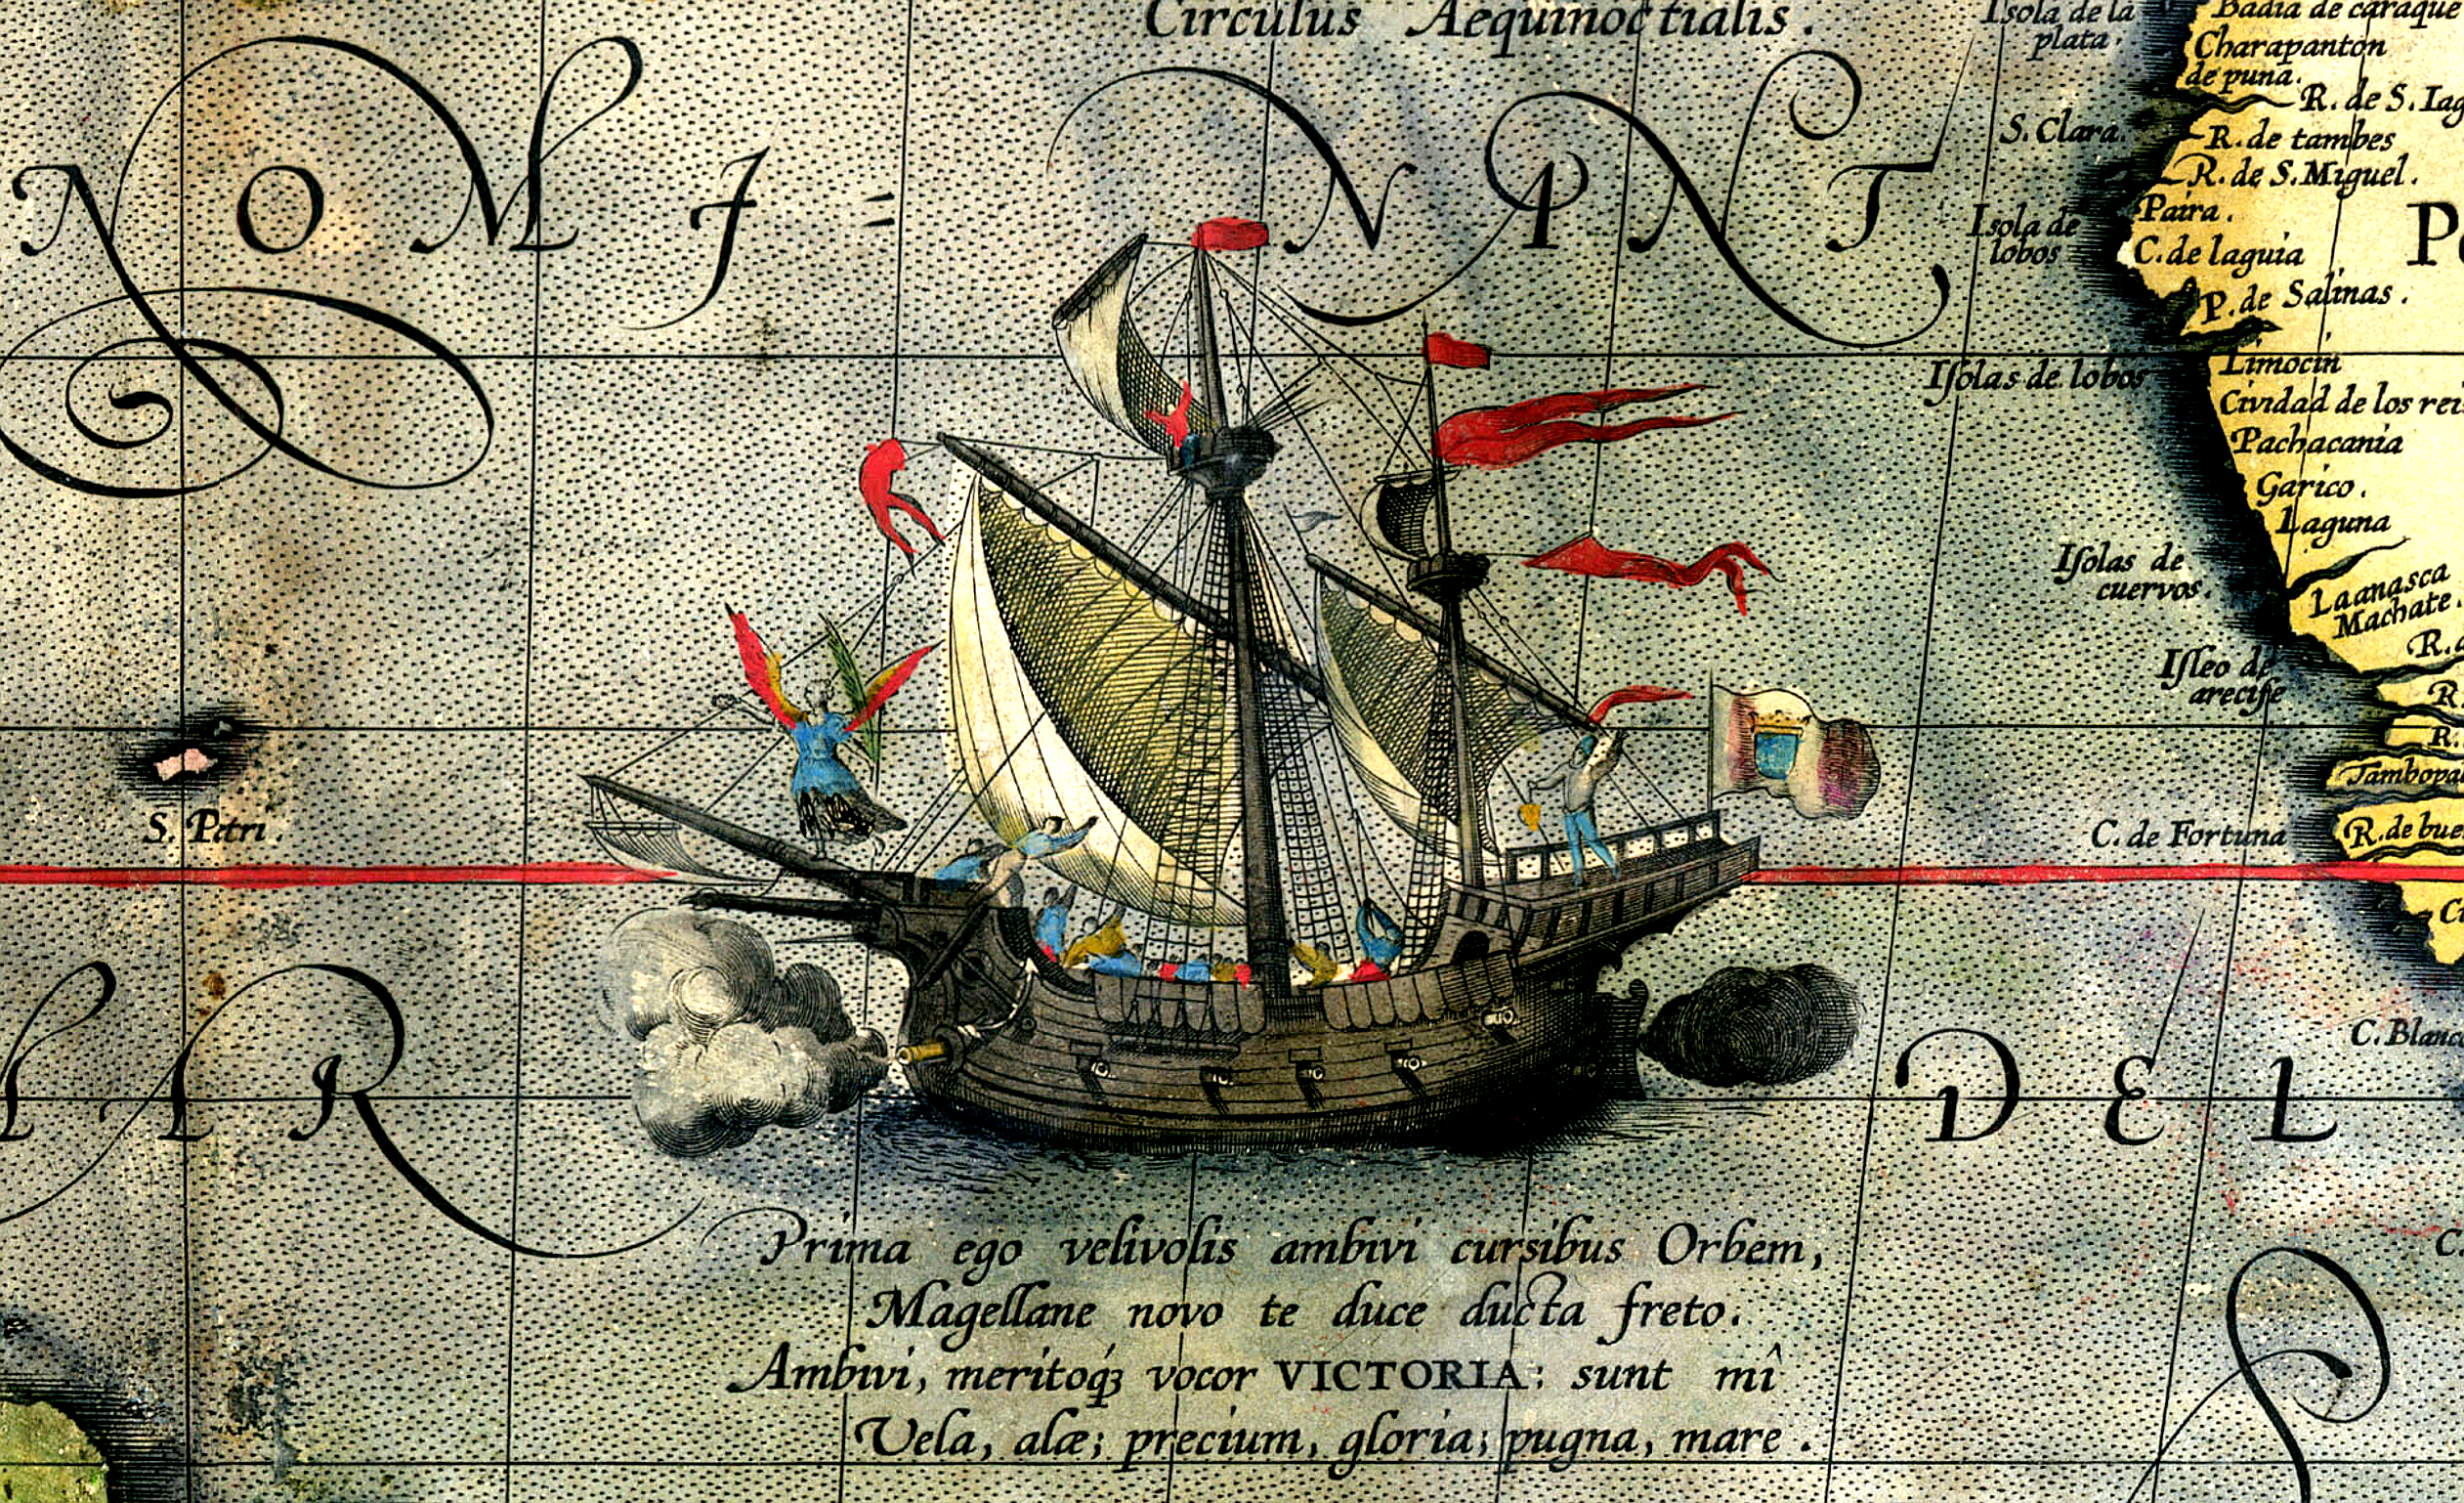 Detail of Magellan's Ship Victoria - Qulle: Wiki Commons